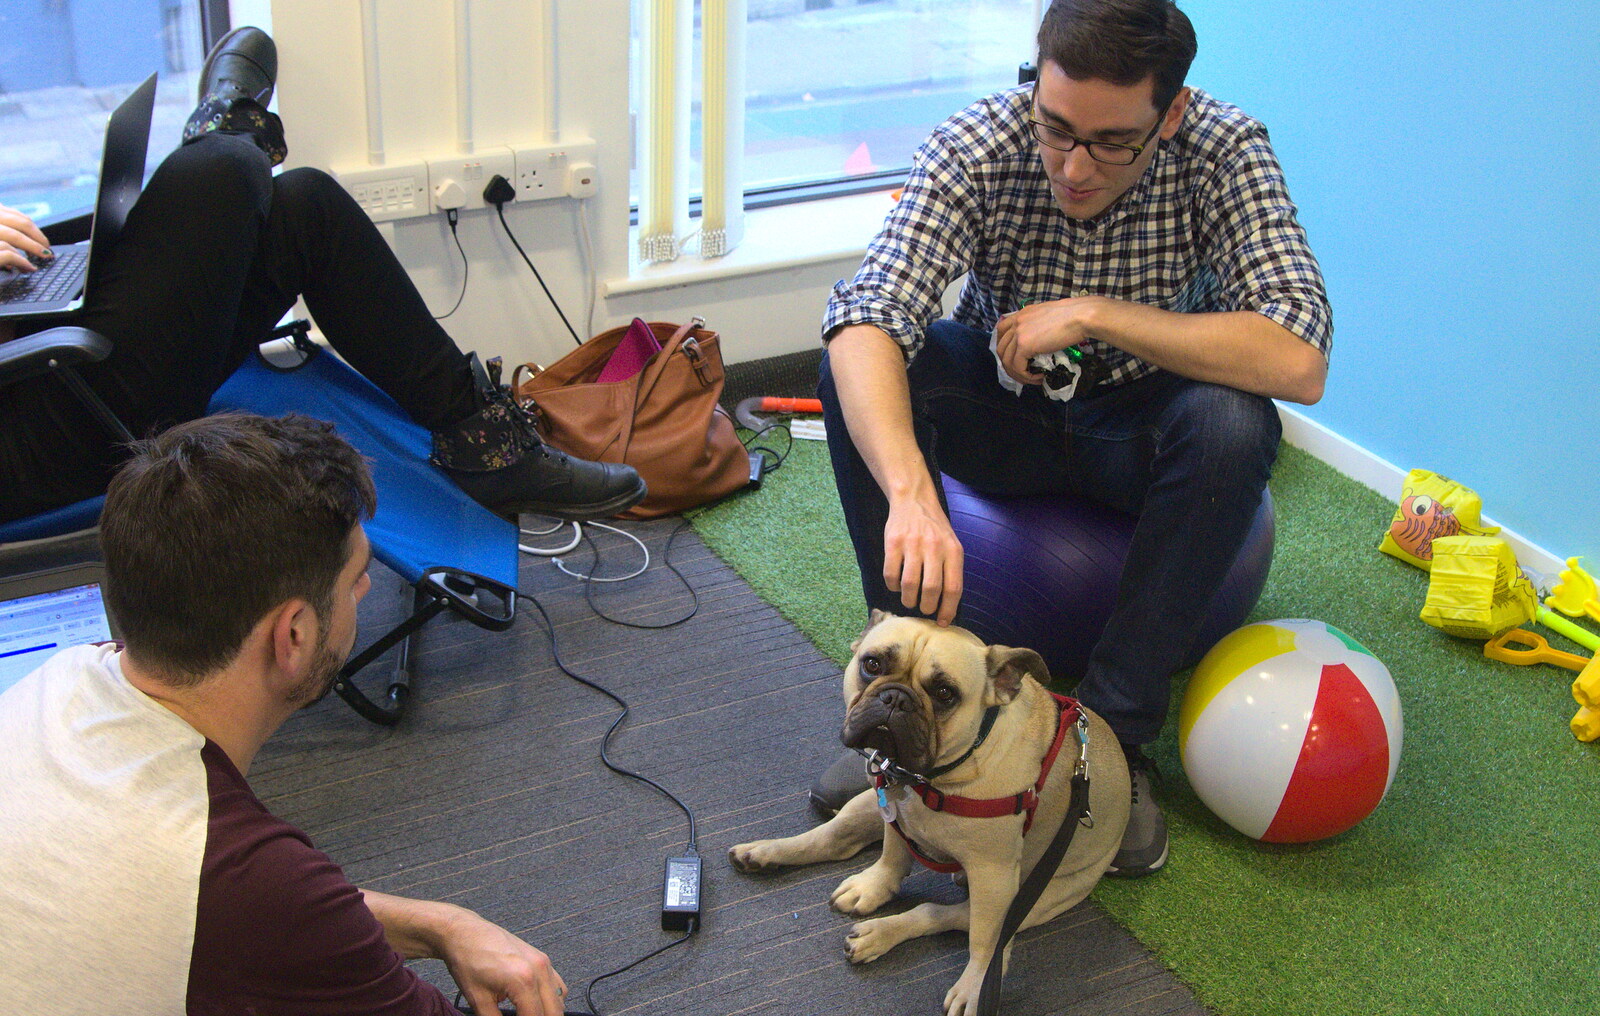 A dog in the office from SwiftKey Innovation Week, Southwark Bridge Road, London - 7th October 2015